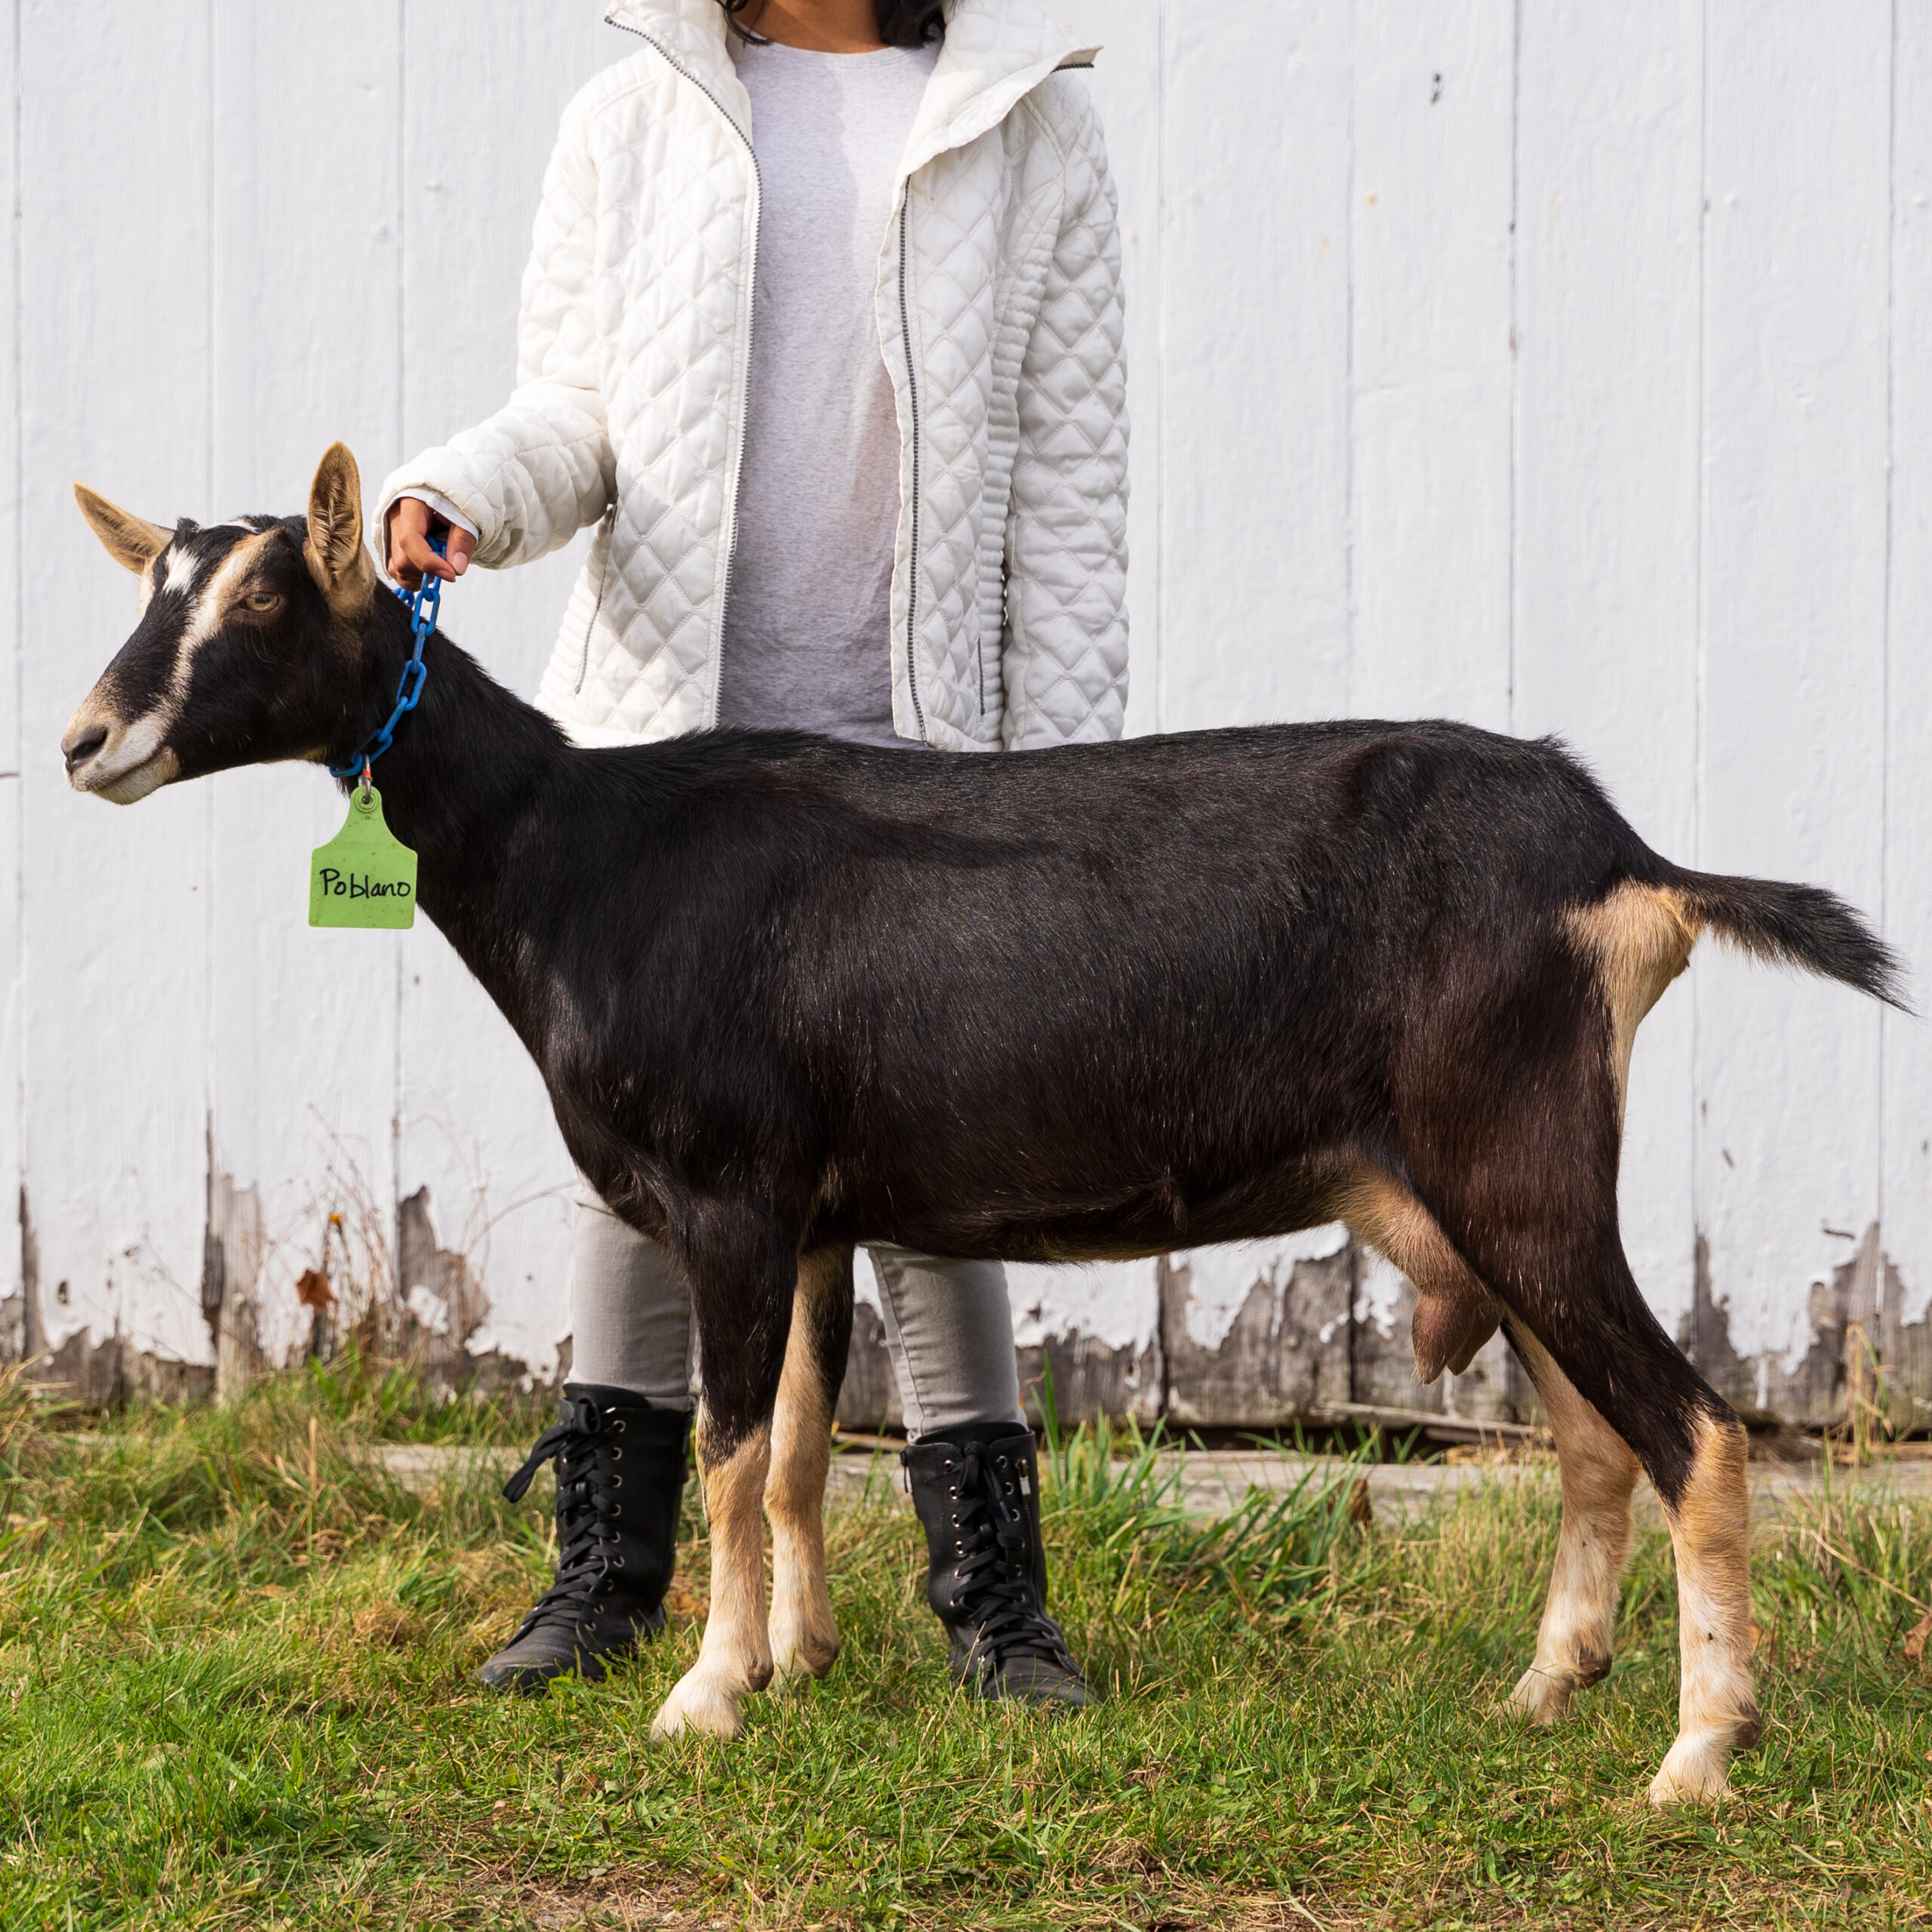 Black goat with white spot on her nose and light brown feet standing in front of a white barn door on the grass being shown by the farmer in Somerville, Maine.